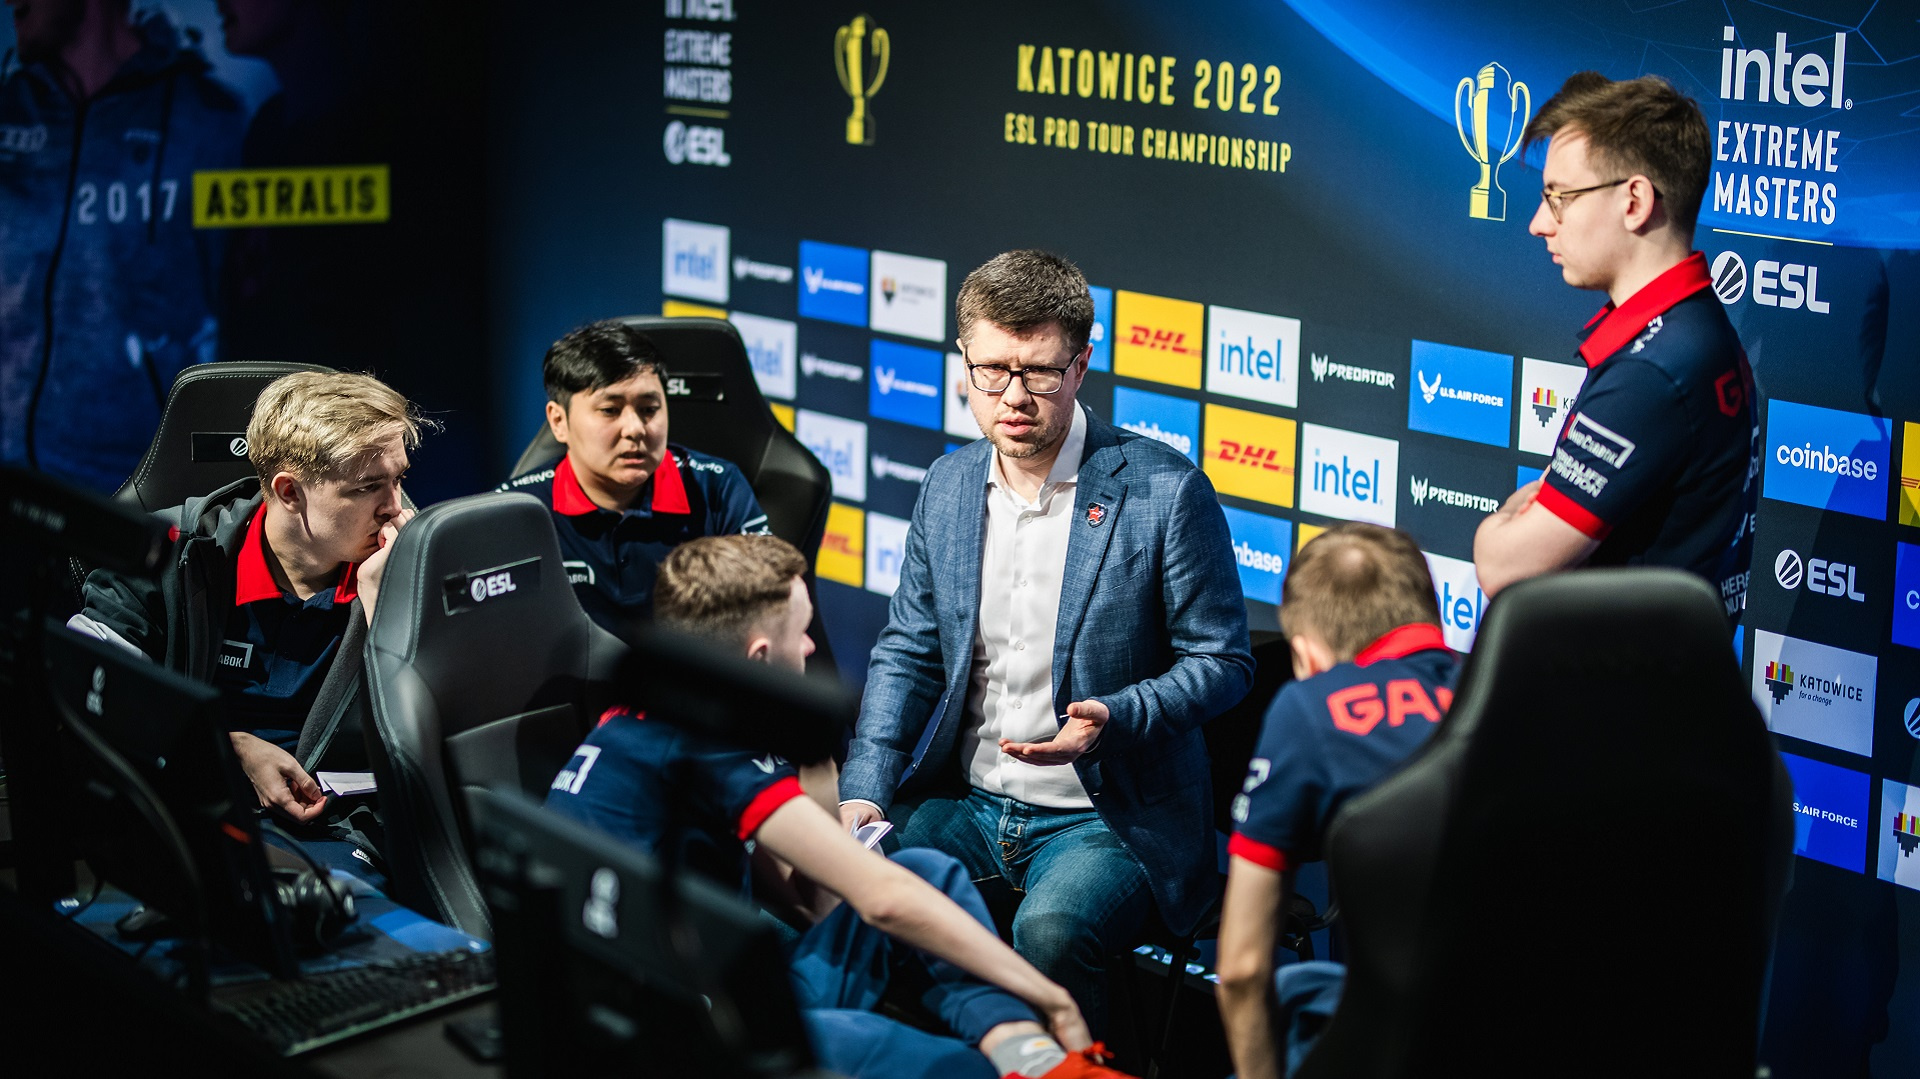 Players to encounter FaZe in the first round of the playoff after four victories in Group C